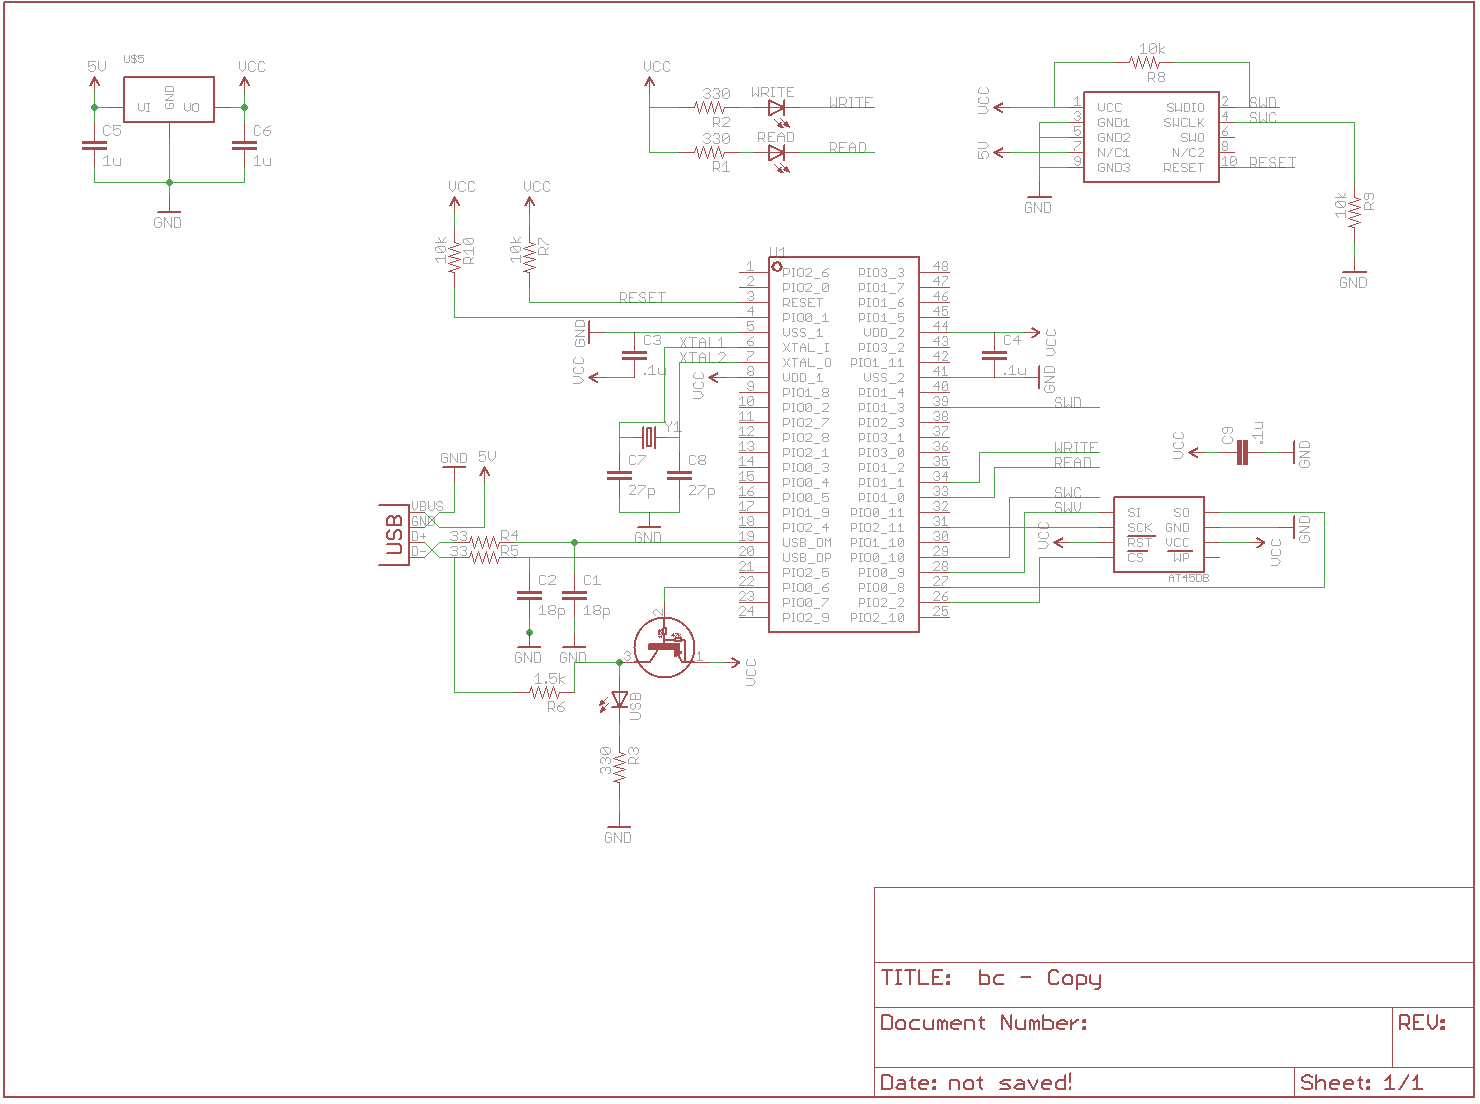 USB Business Card Schematic